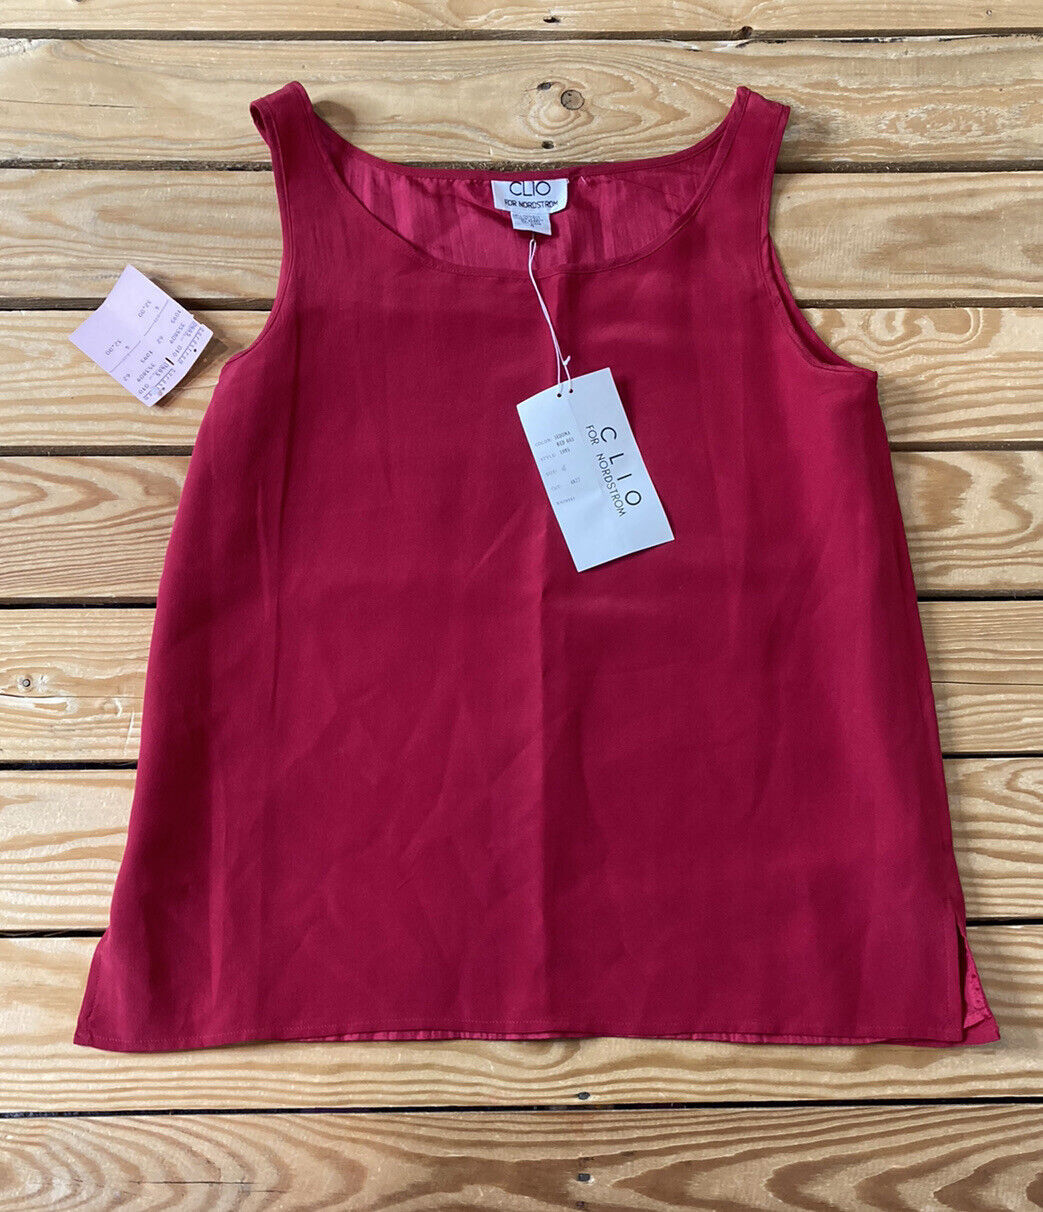 Primary image for Vintage clio for Nordstrom NWT women’s 100% silk sleeveless blouse size 4 red B5